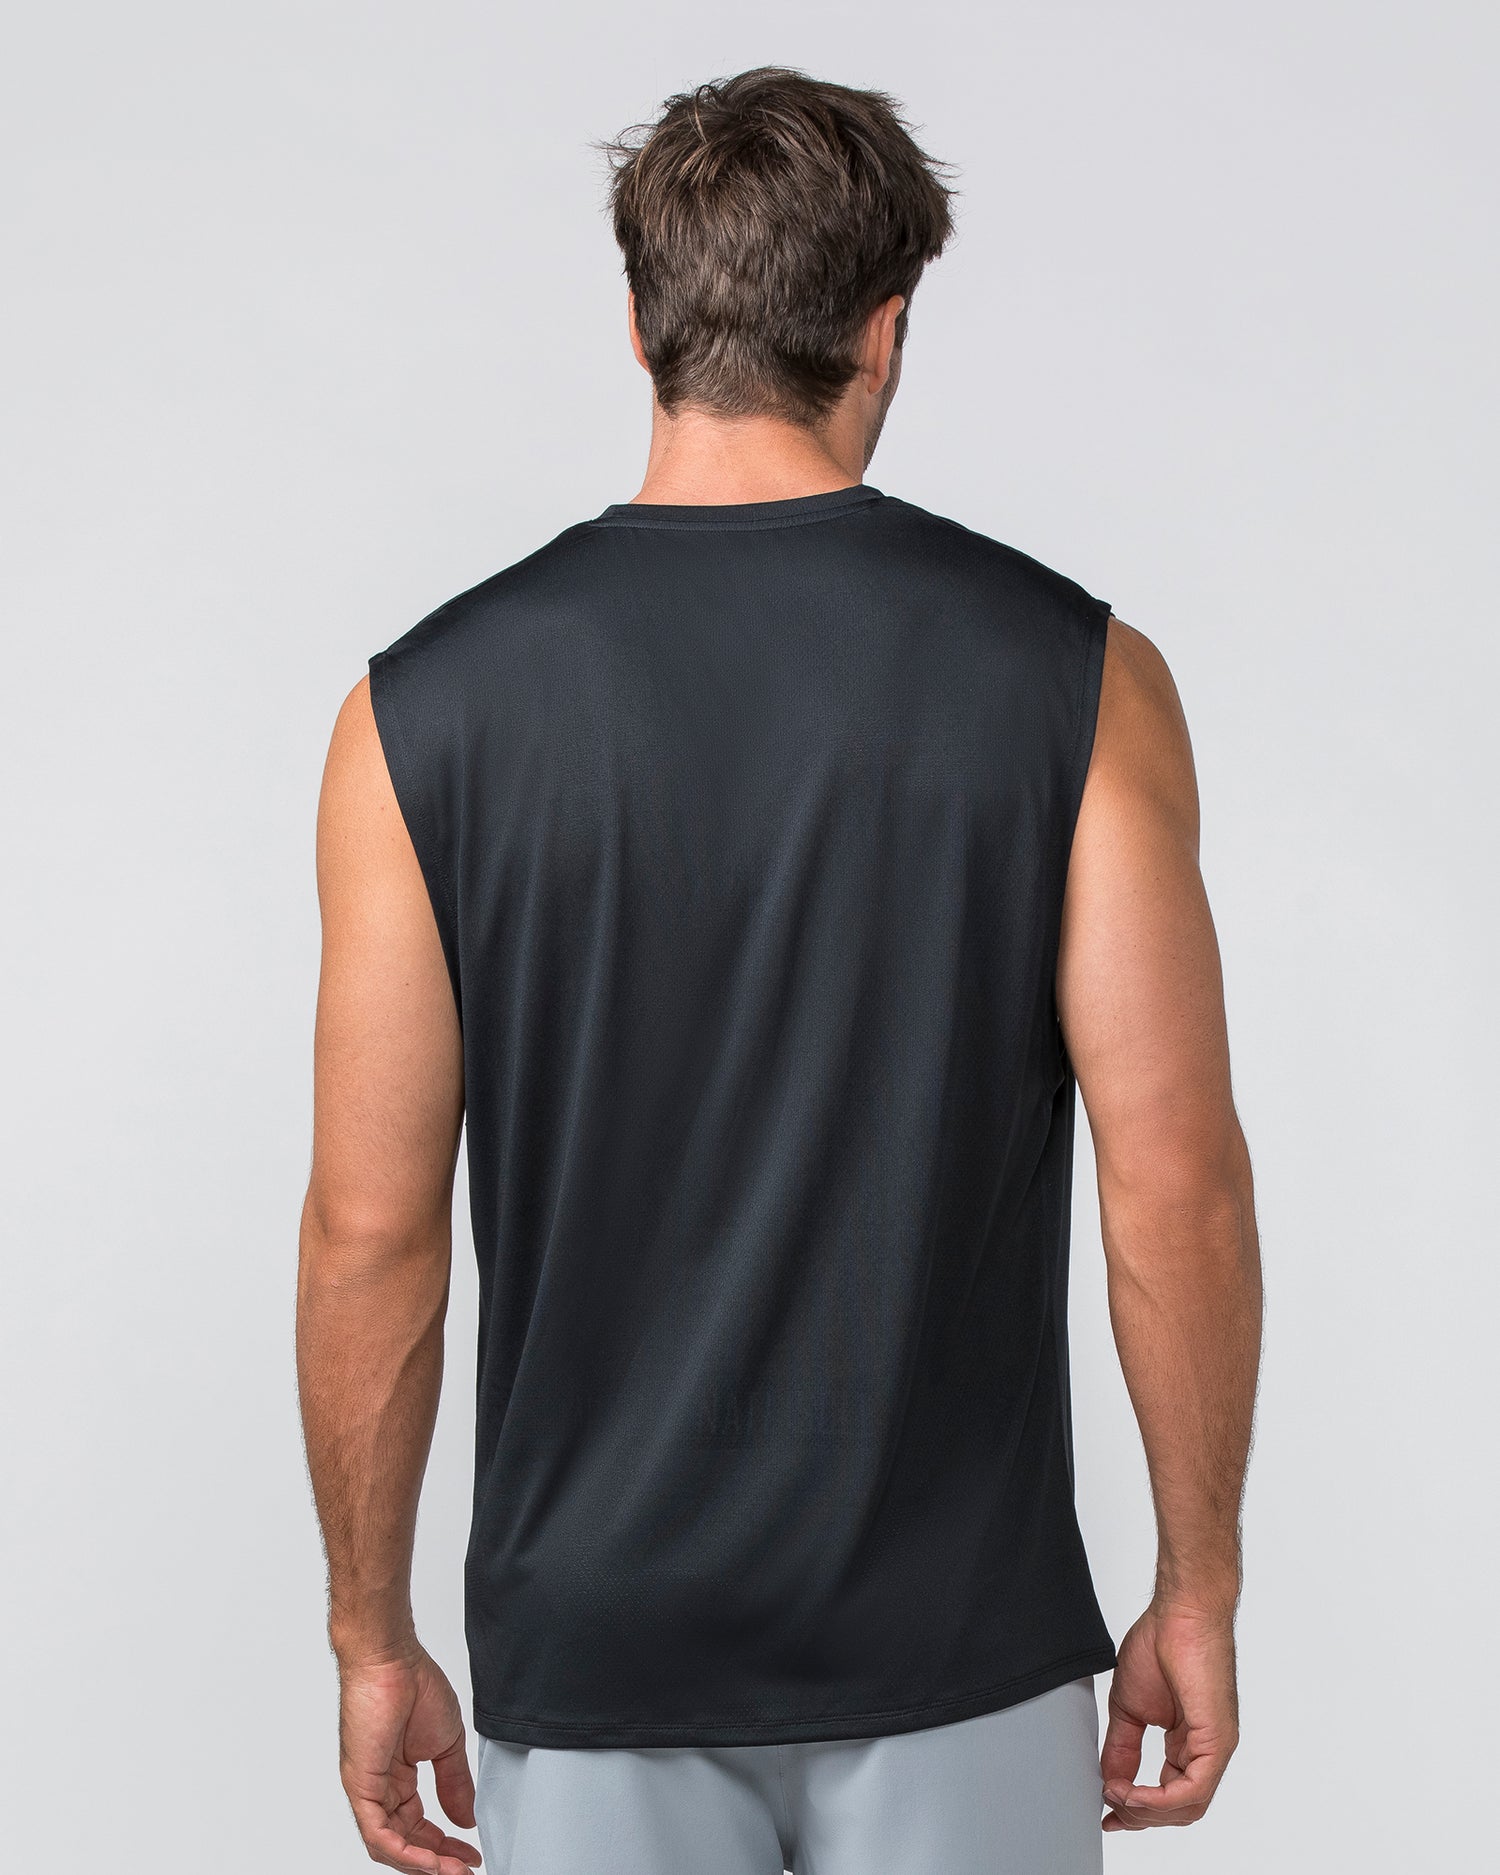 Relaxed Active Tank - Black